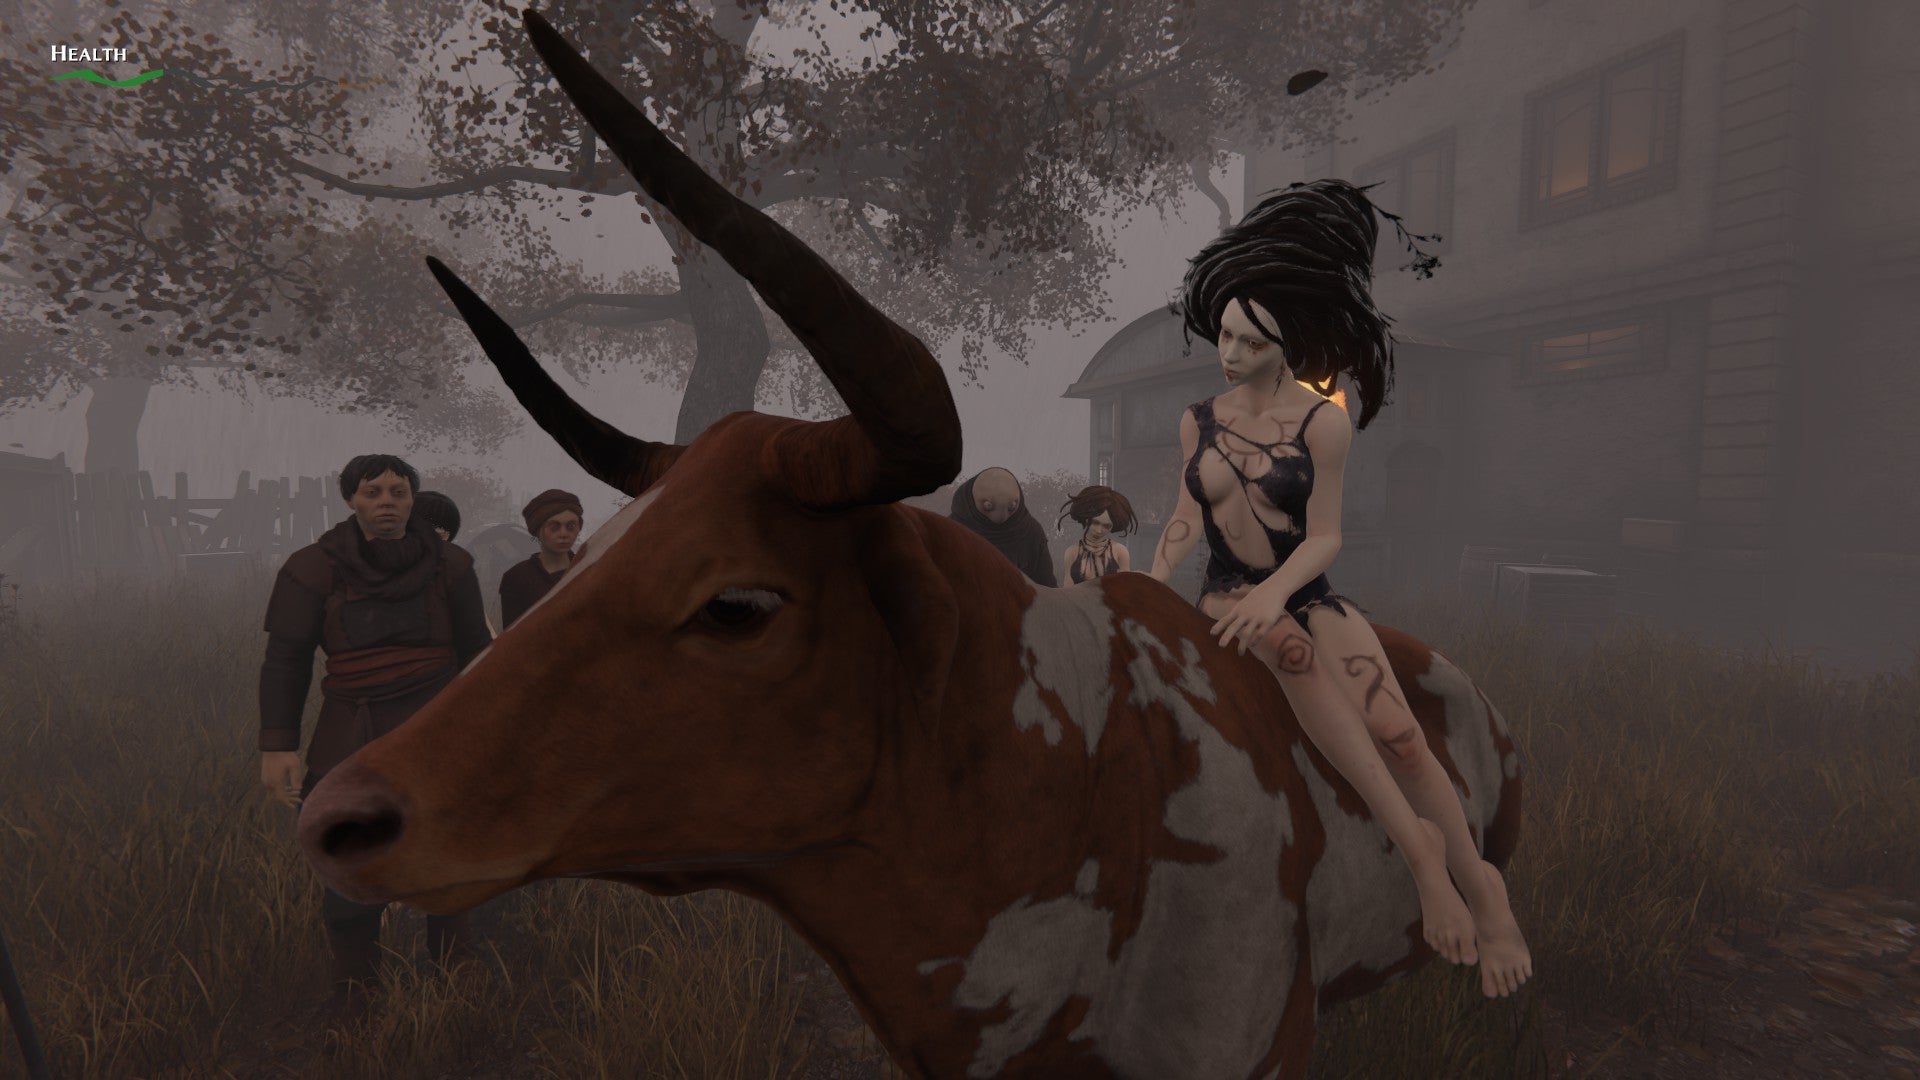 A scantily clad woman rides a cow in Pathologic